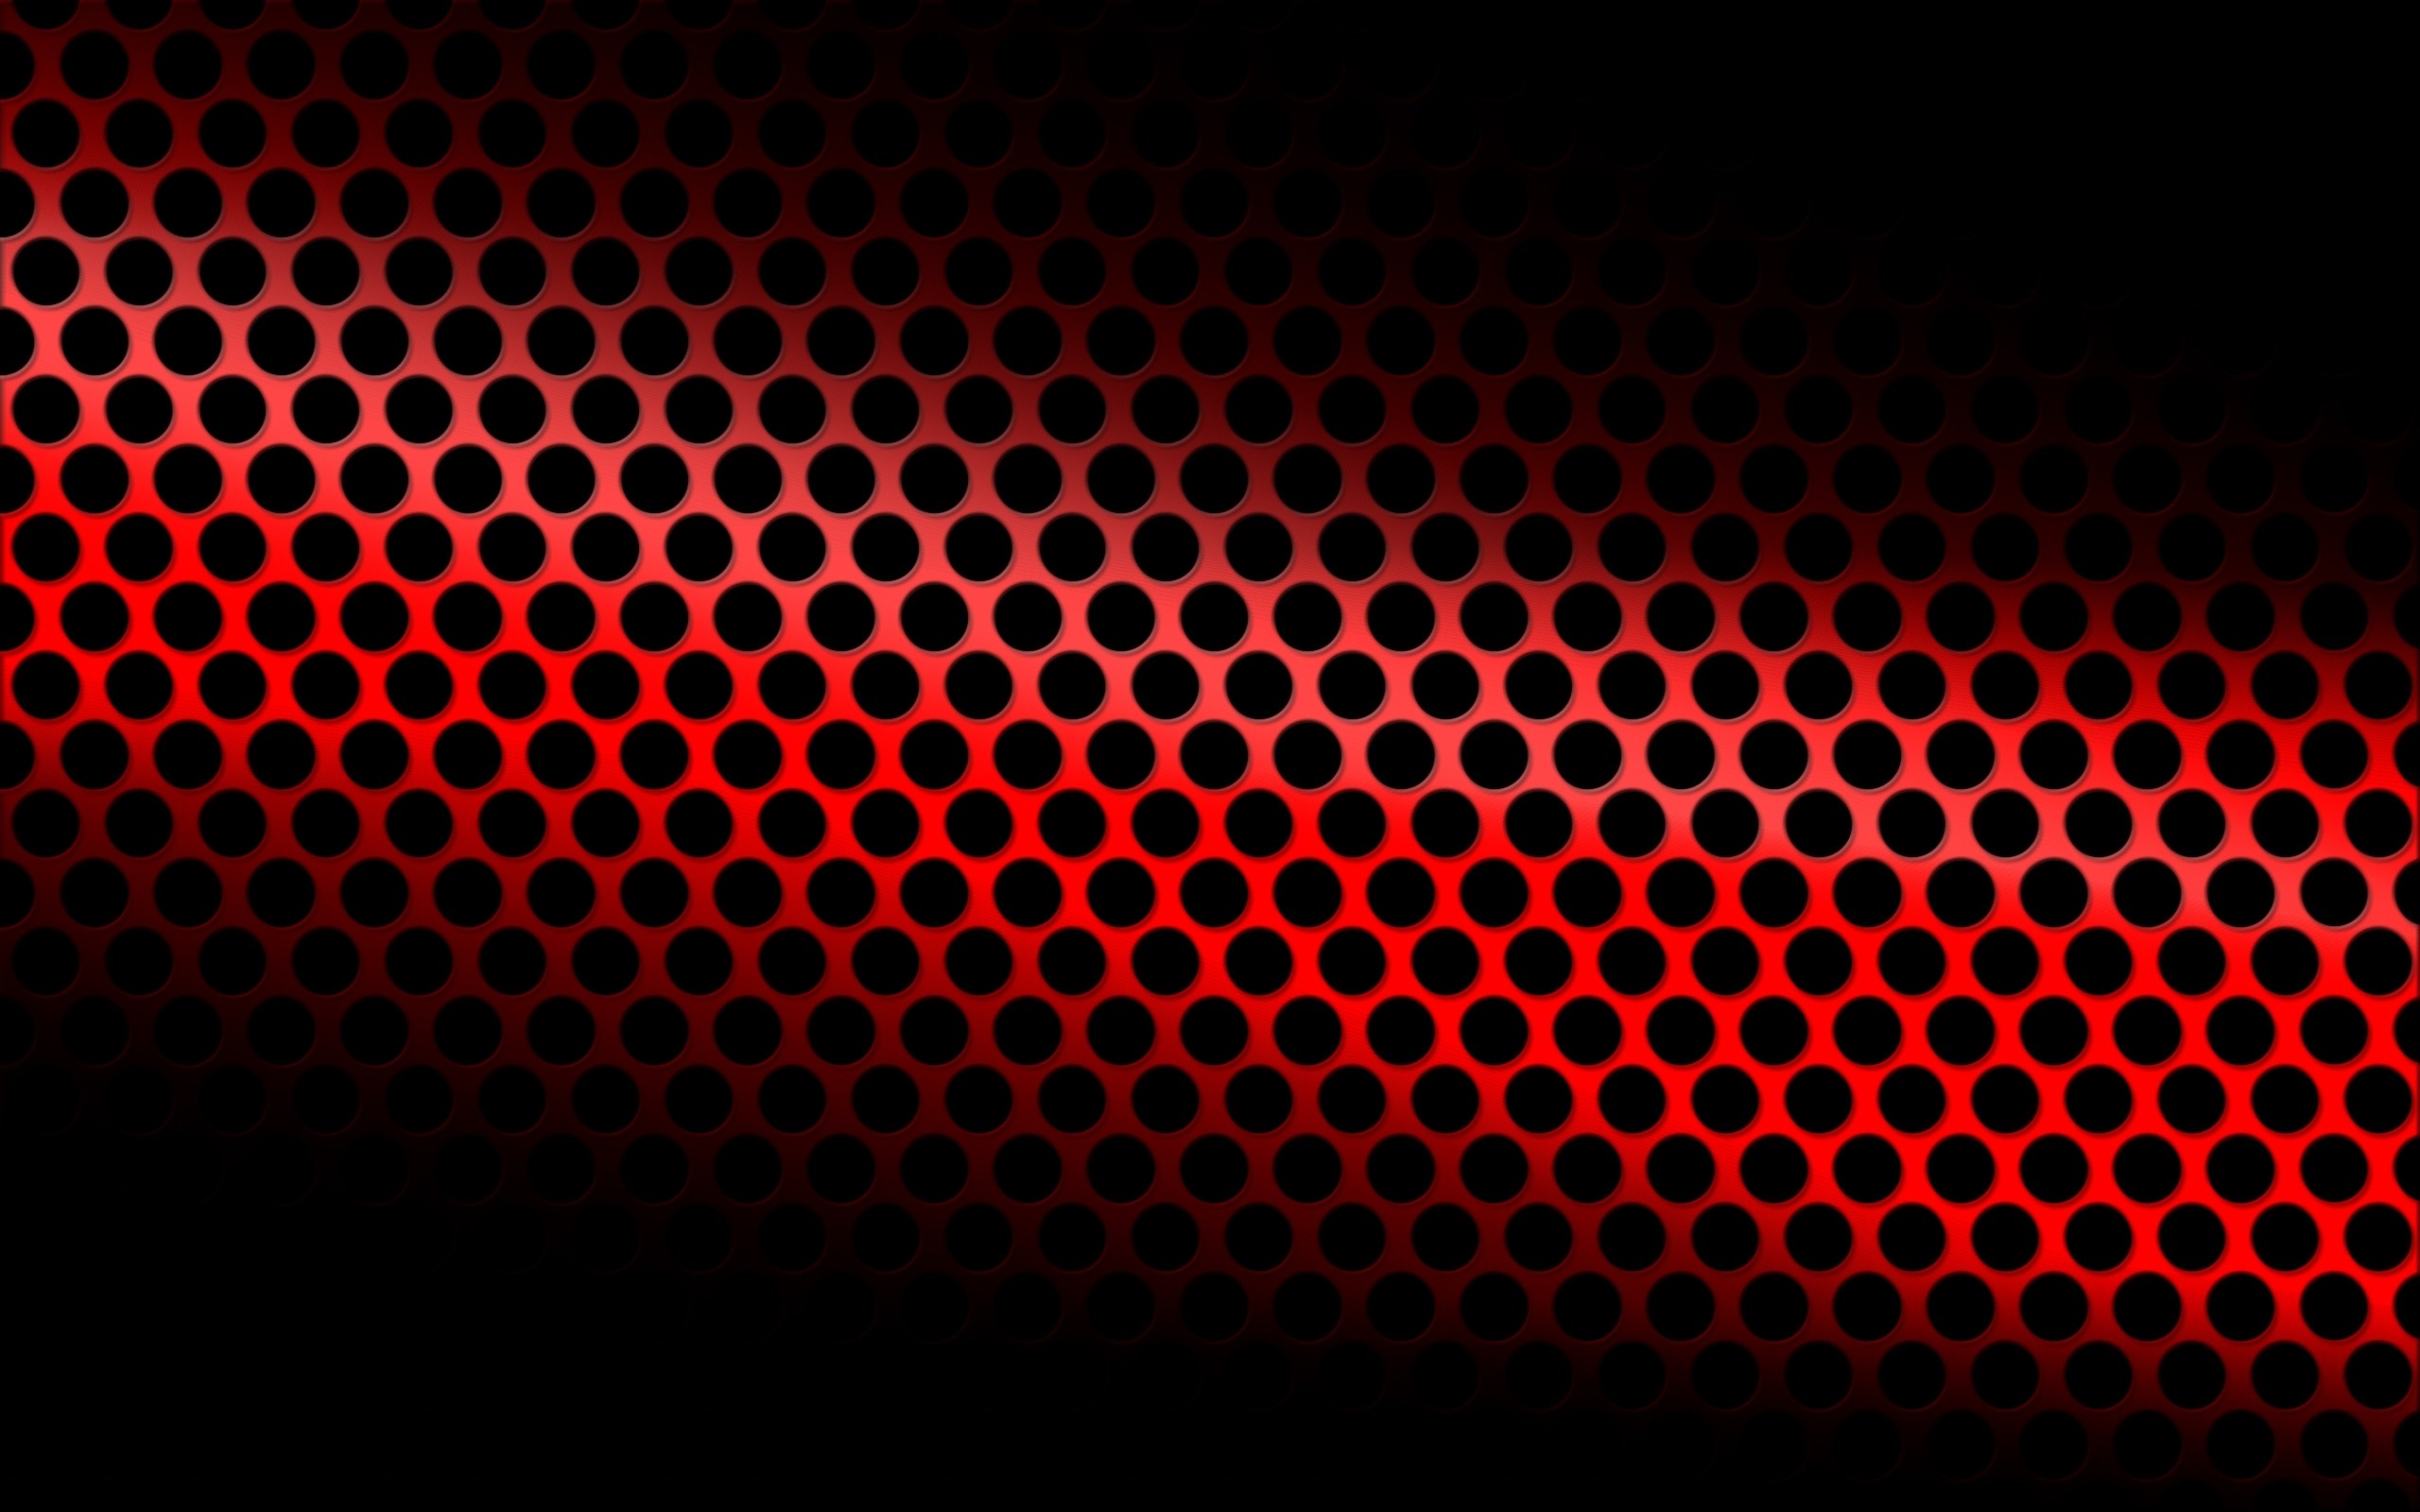 2560x1600 Title : black-and-red-hd-background – wallpaper.wiki. Dimension : 2560 x  1600. File Type : JPG/JPEG